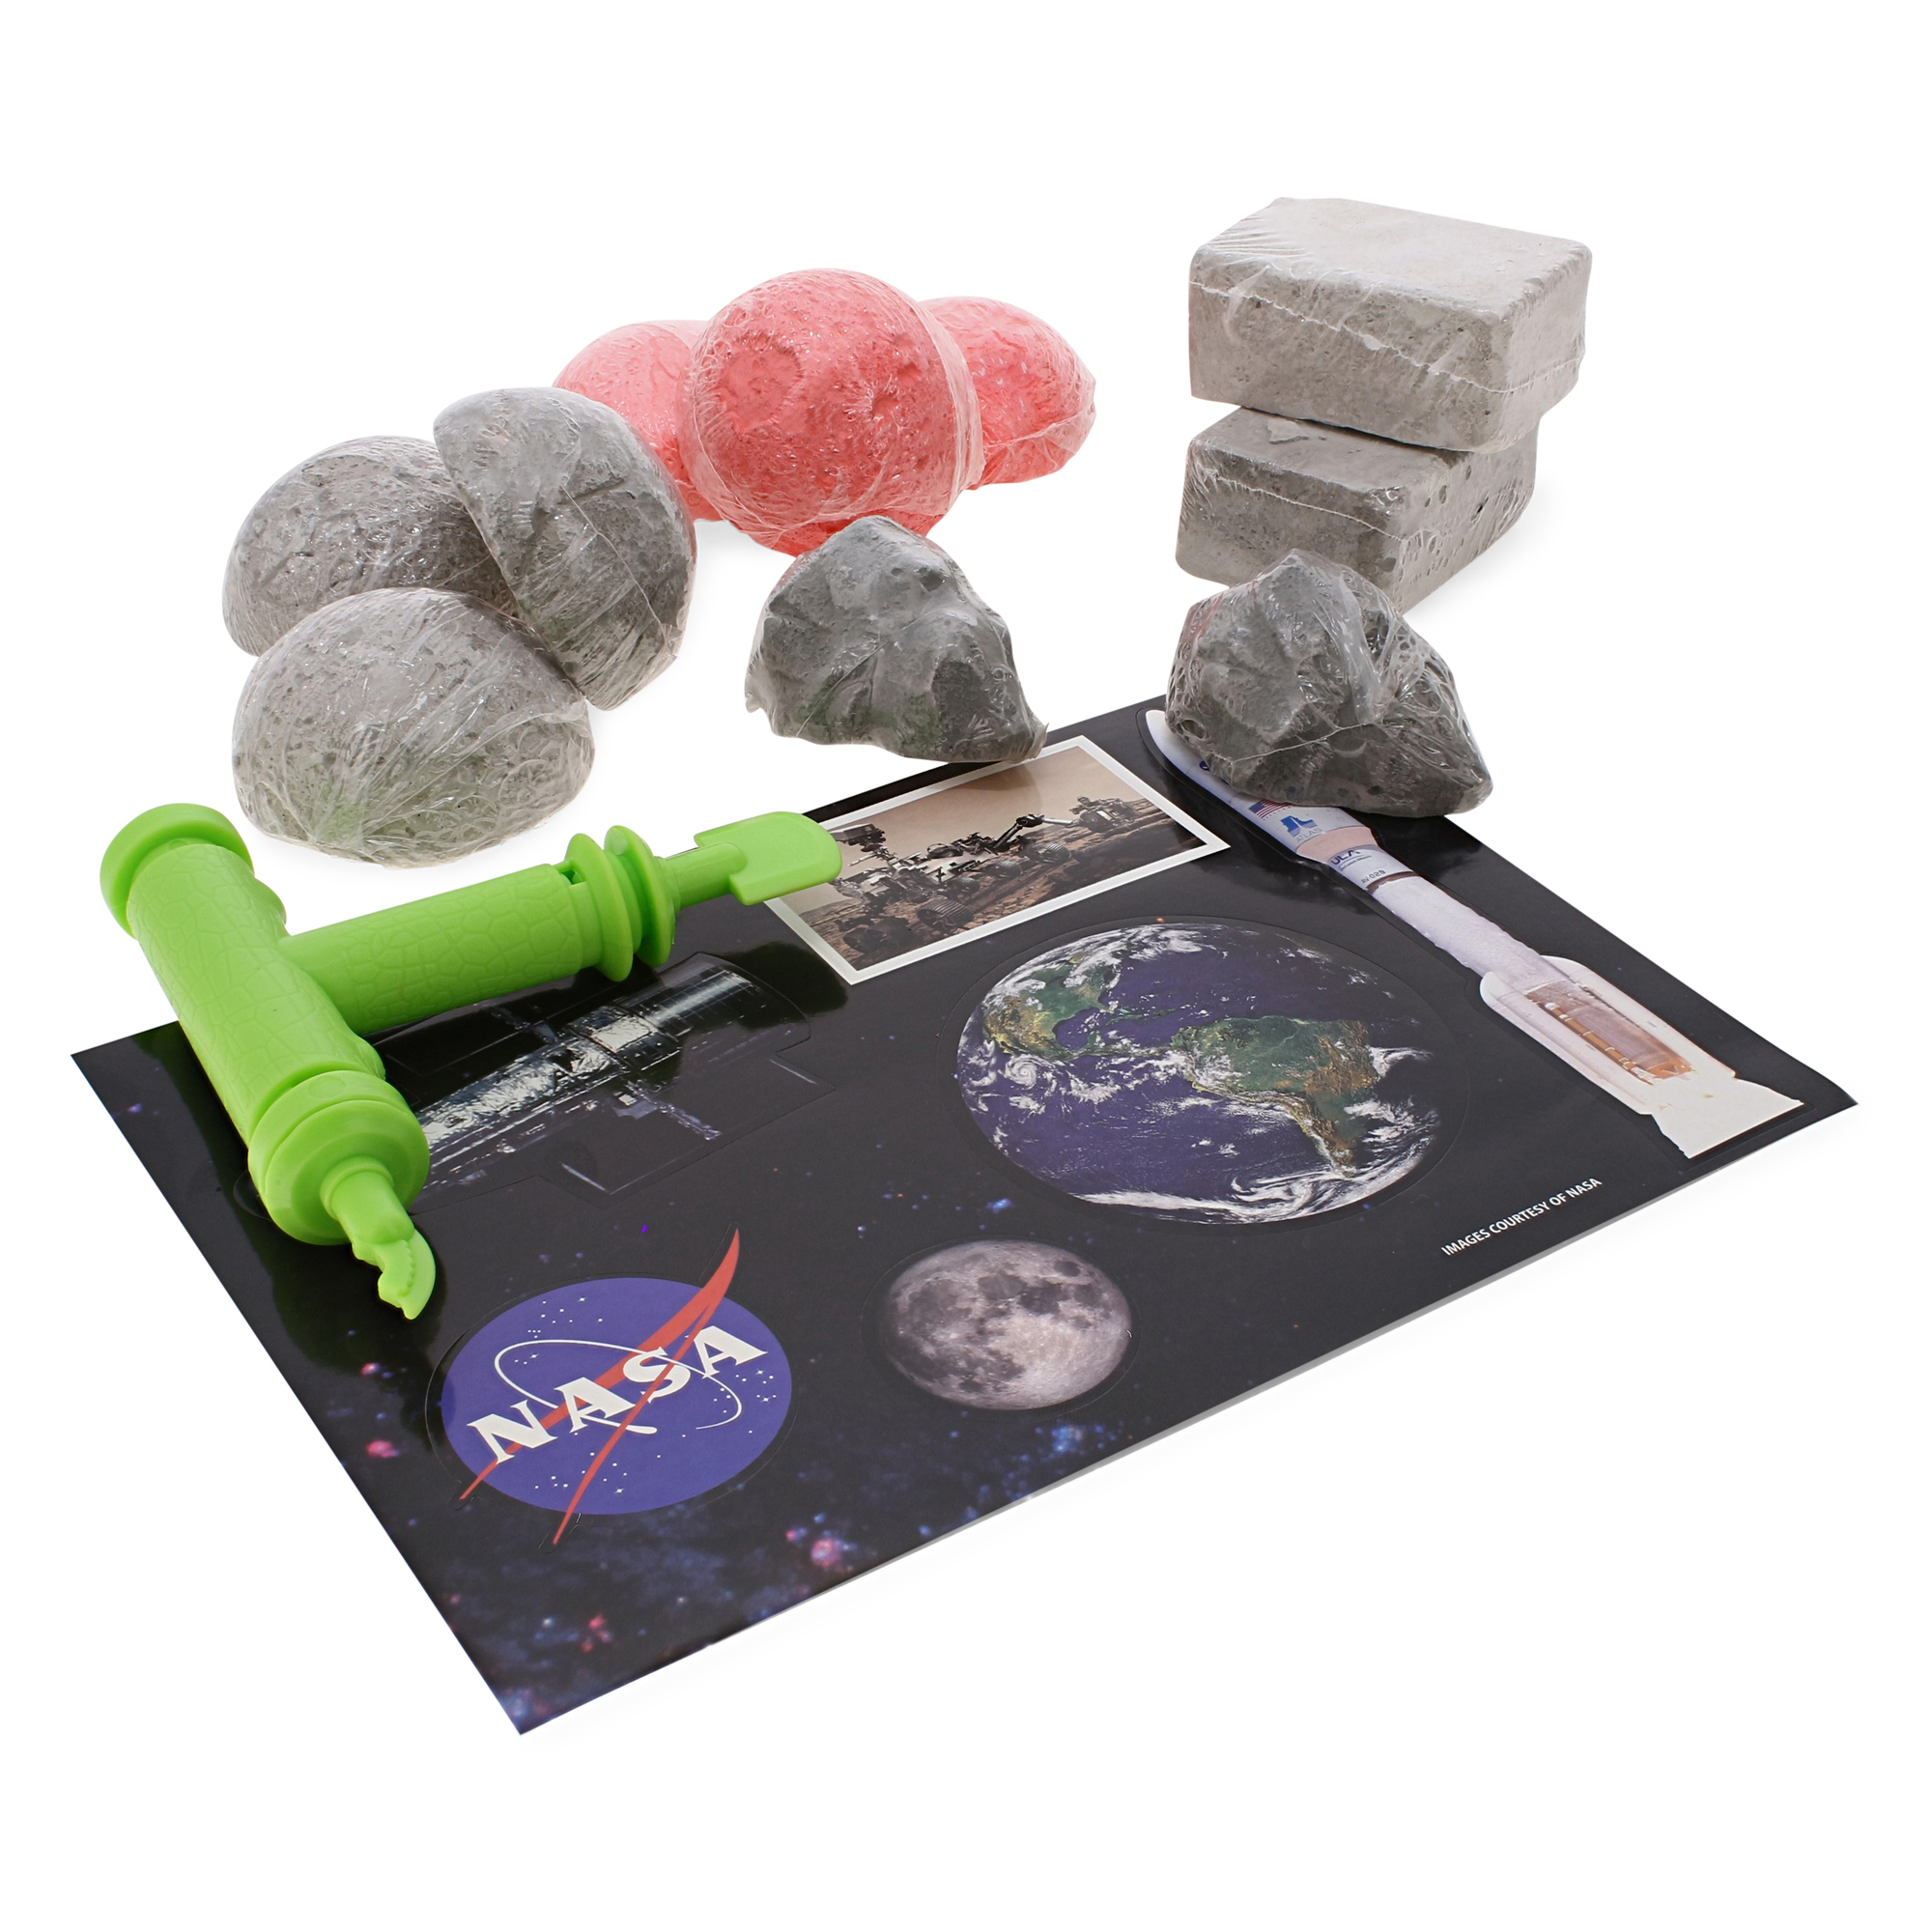 10 in 1 space exploration dig kit